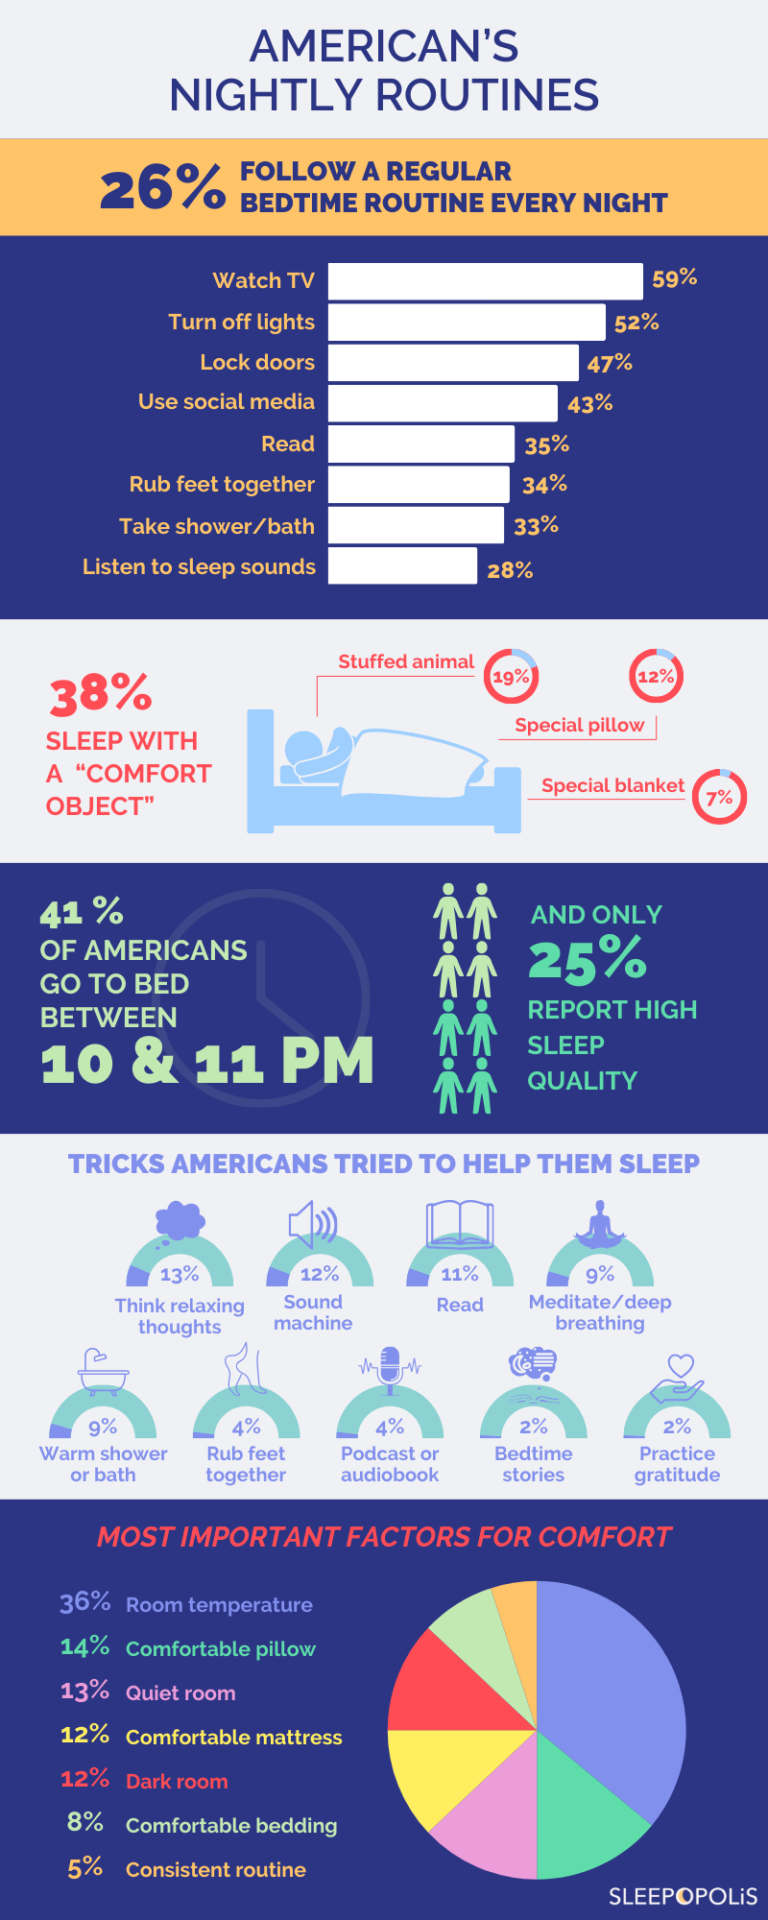 Survey Sheds Light On Popular Bedtime Routines And Nightly Rituals Of Adults Sleepopolis 4093